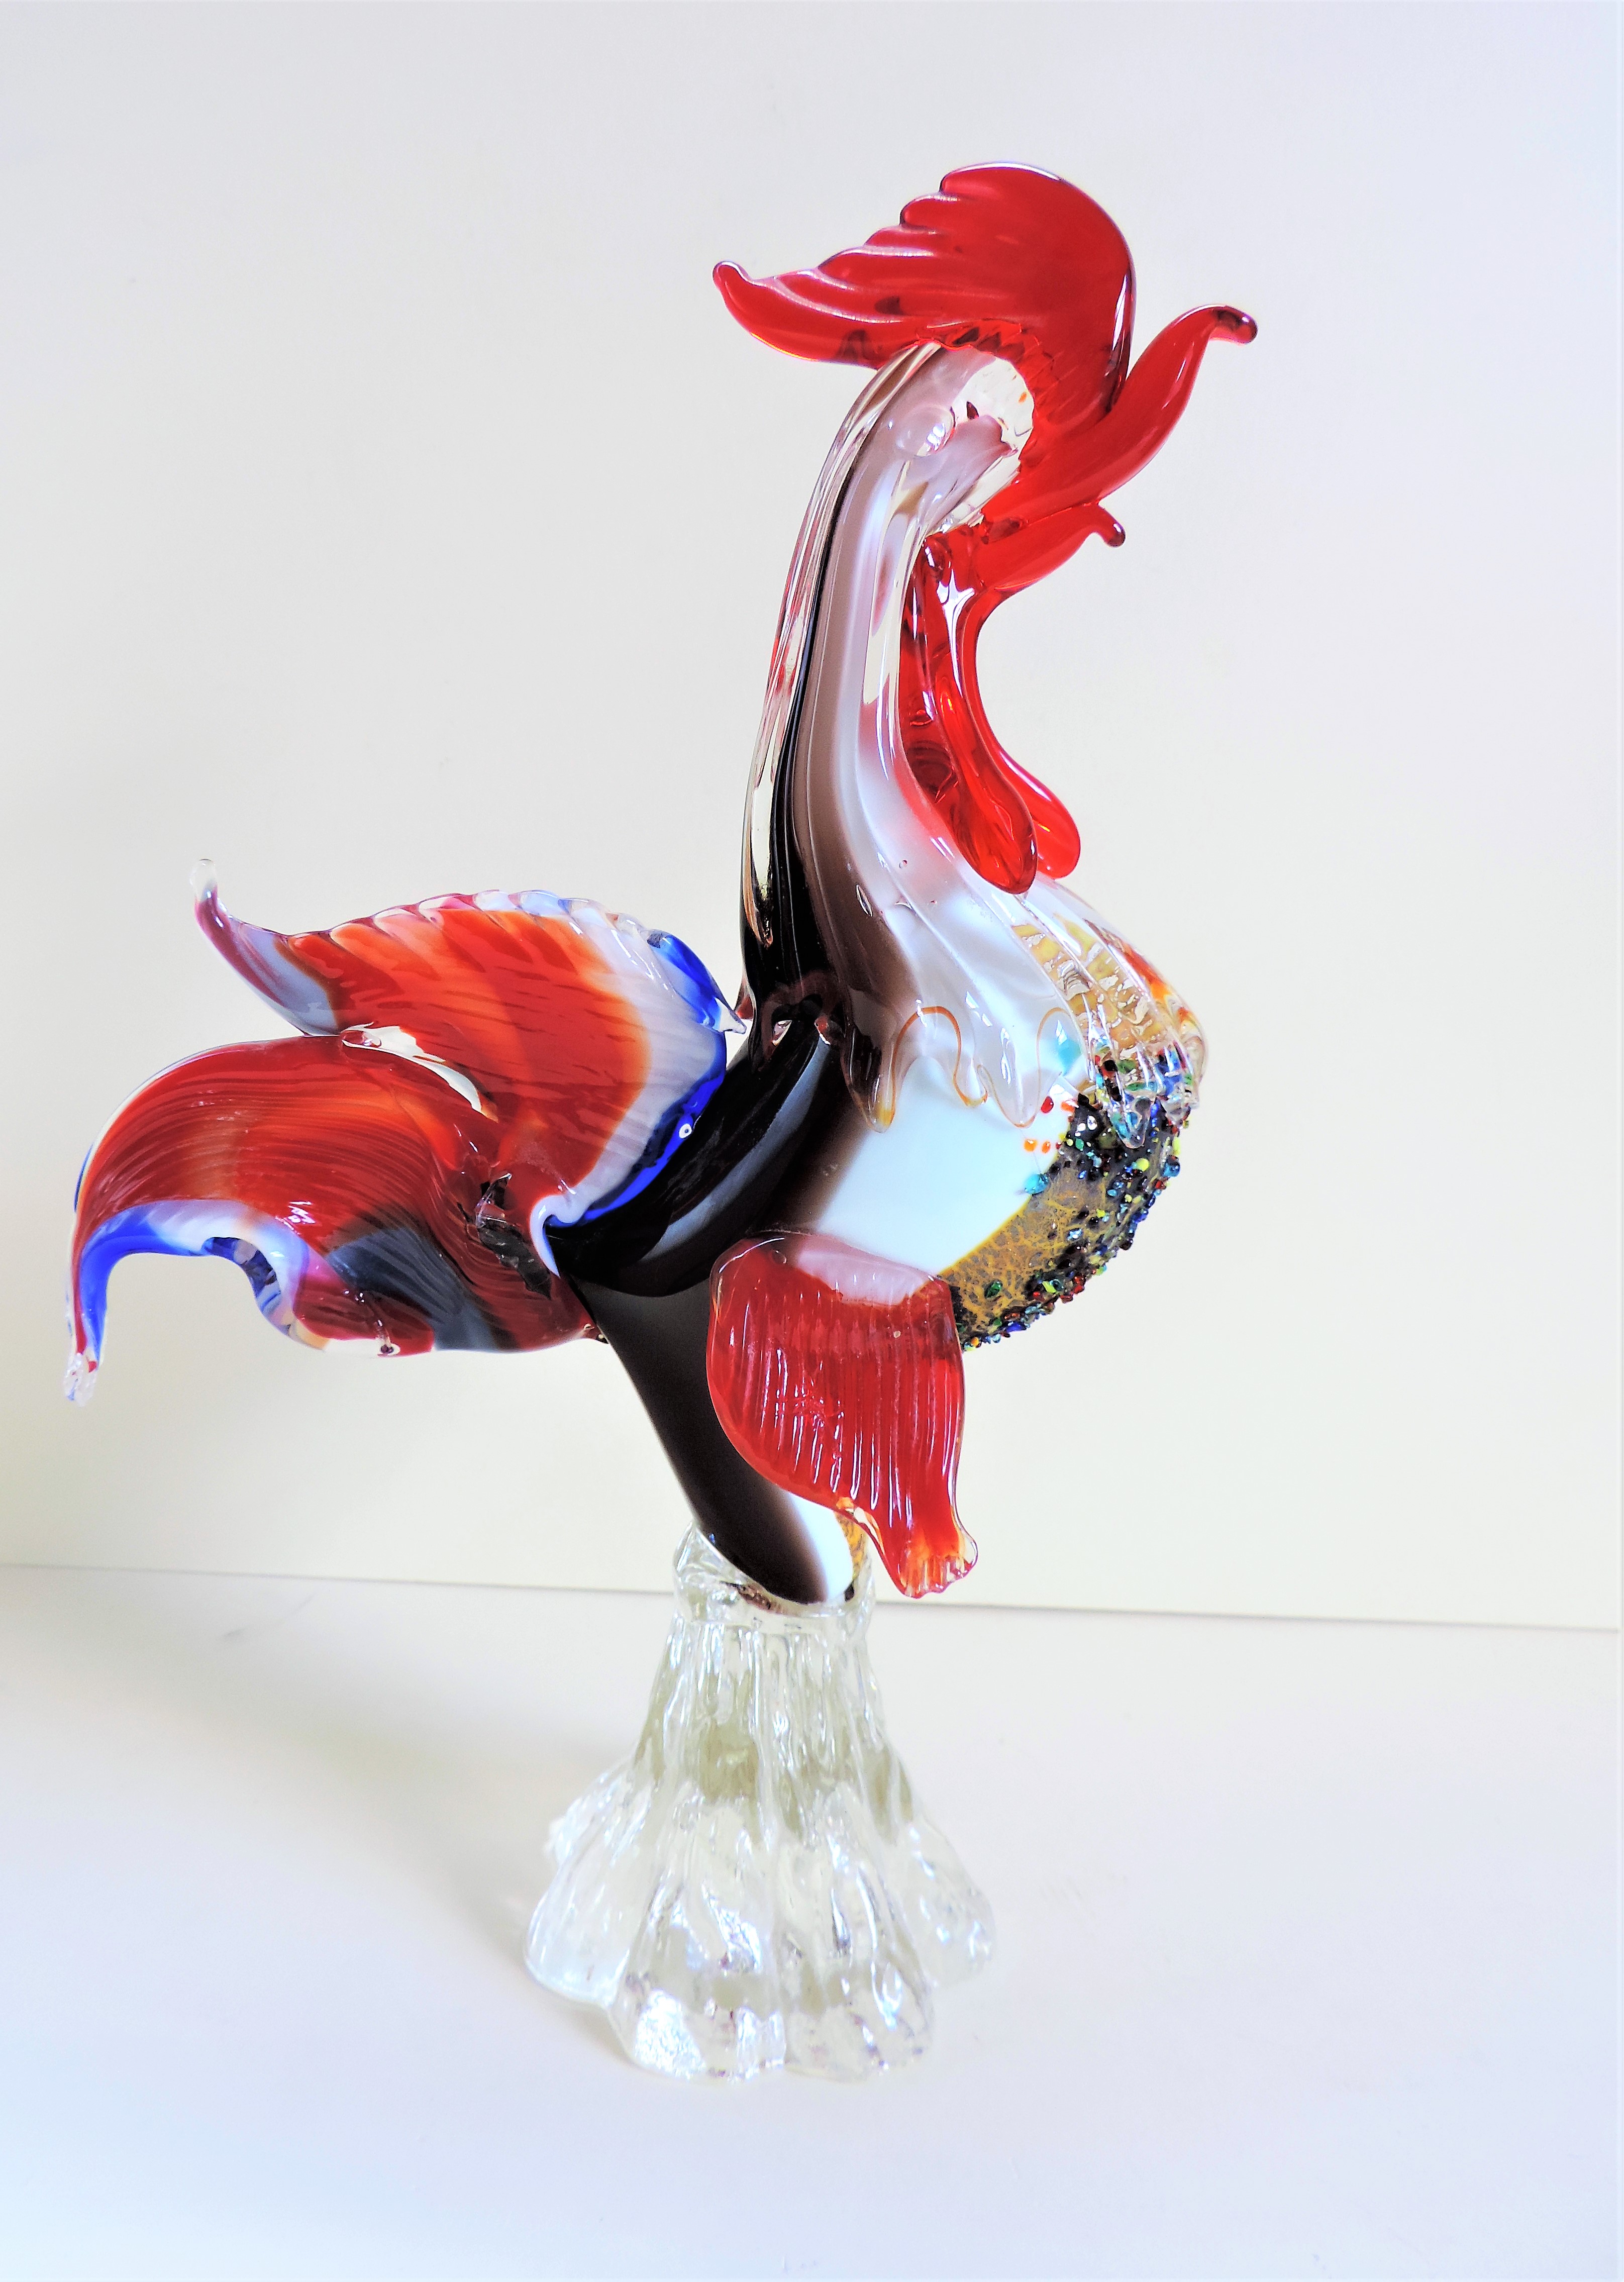 Large Vintage Murano Glass Rooster Sculpture 30cm Tall - Image 3 of 7